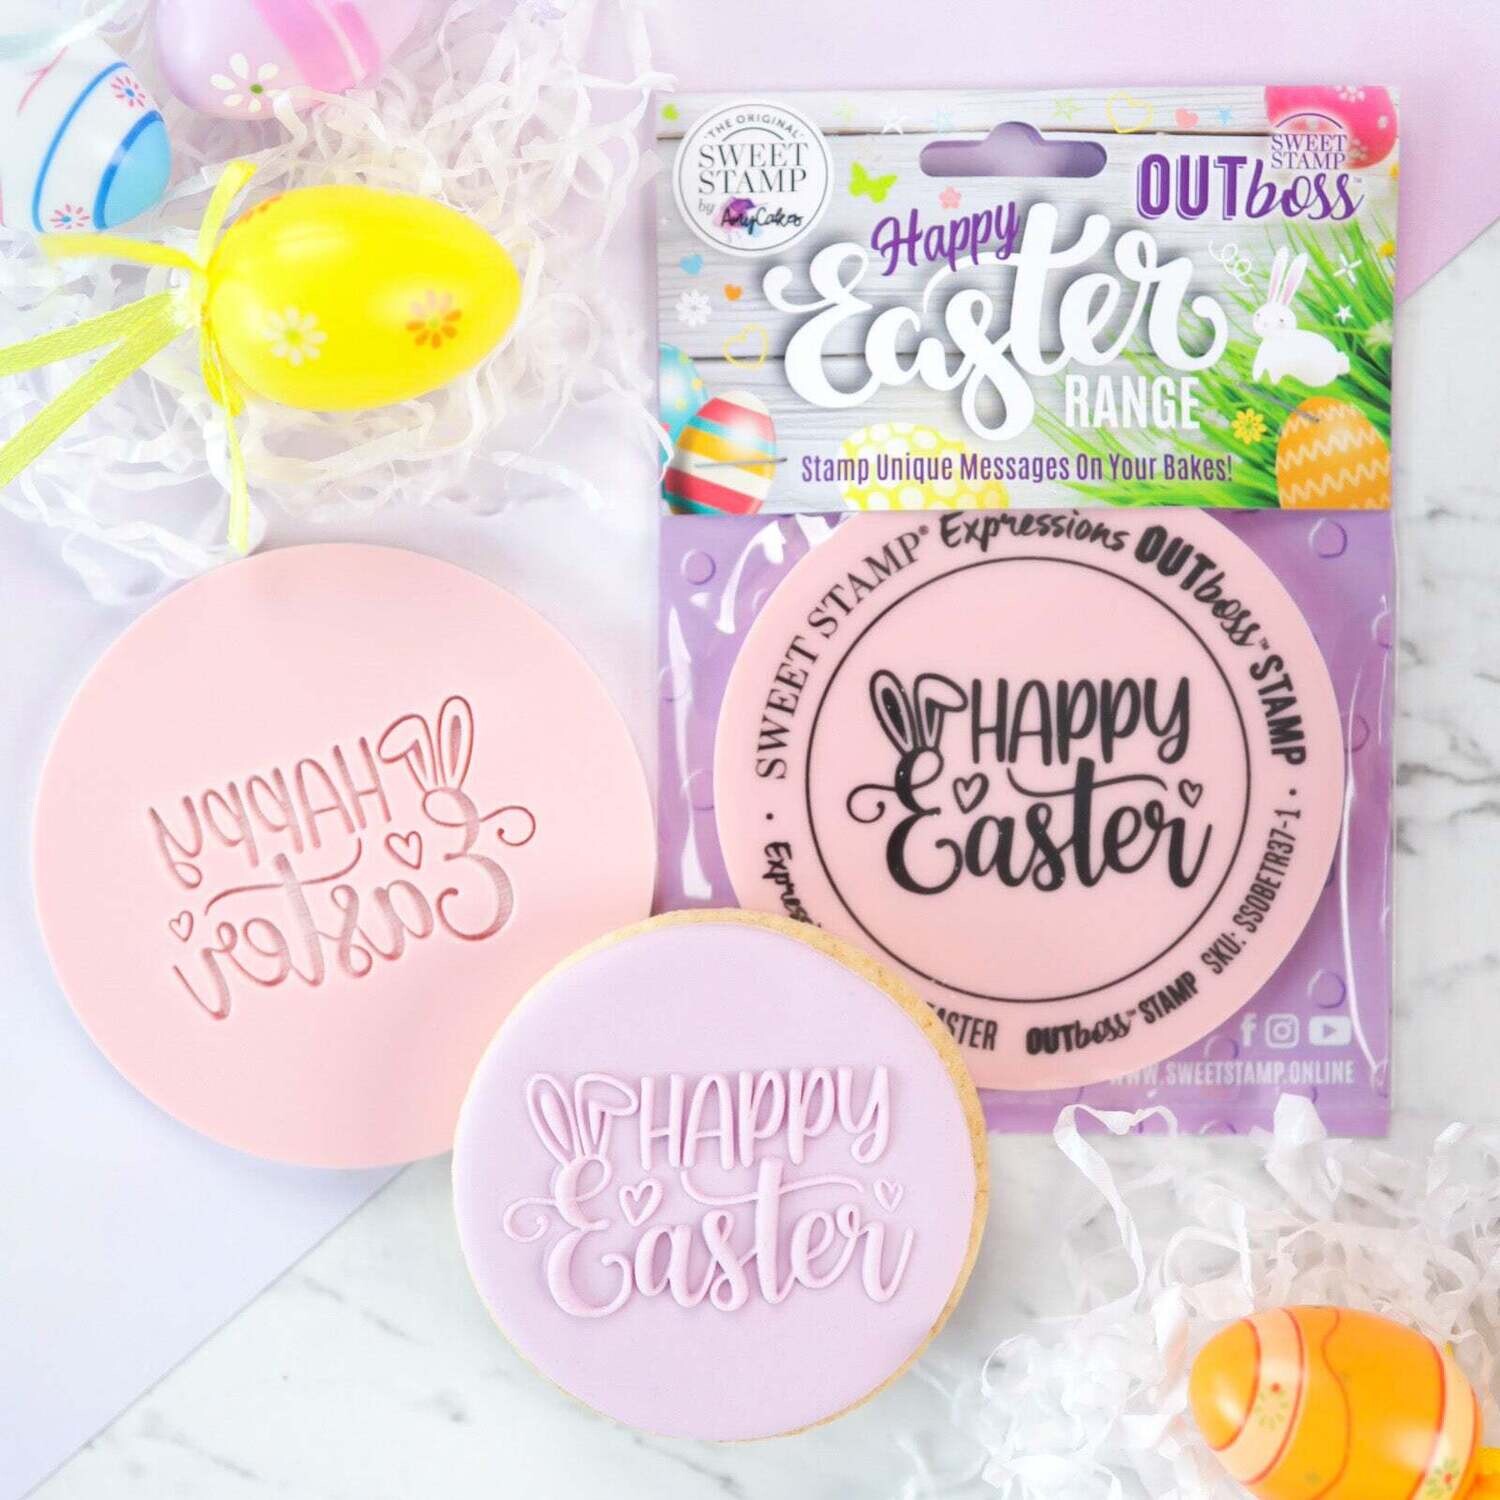 Sweet Stamp -OUTboss Easter -CURLY 'HAPPY EASTER' with Bunny Ears- Πασχαλινή Σφραγίδα